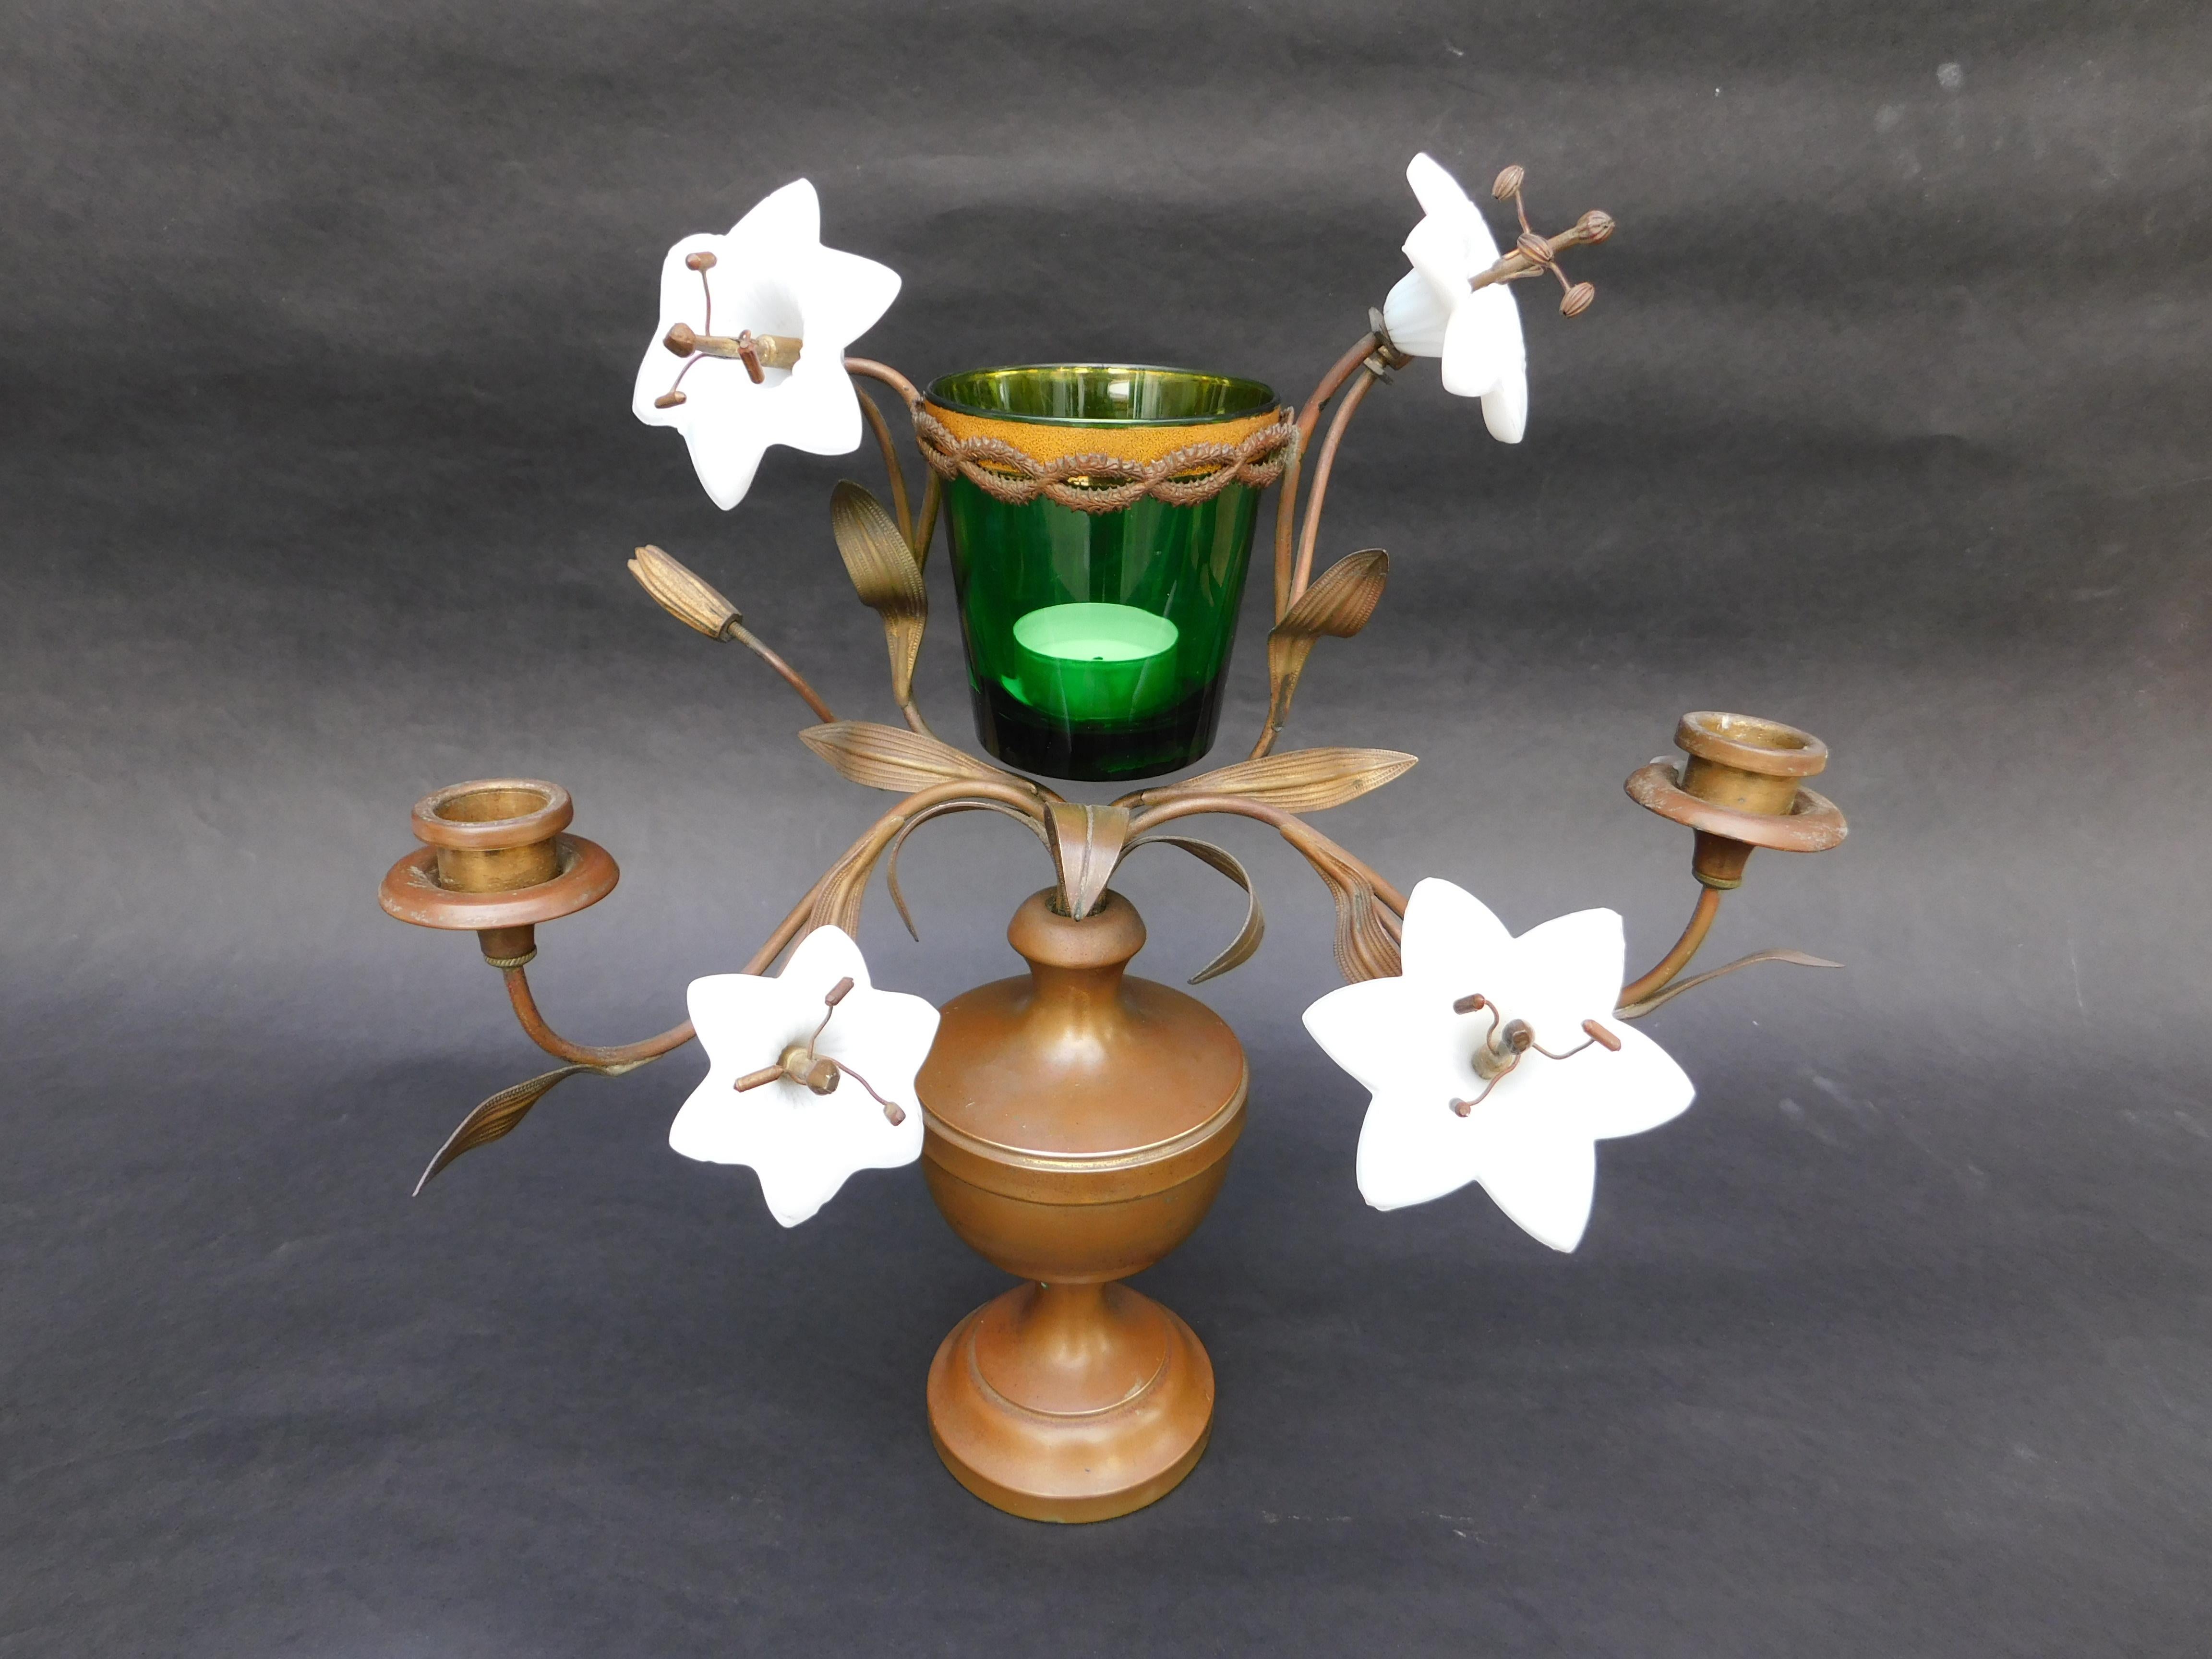 French bronze candelabra with opaline glass lillies. Holds two candlesticks and a tea light candle (in the center), circa 1880.